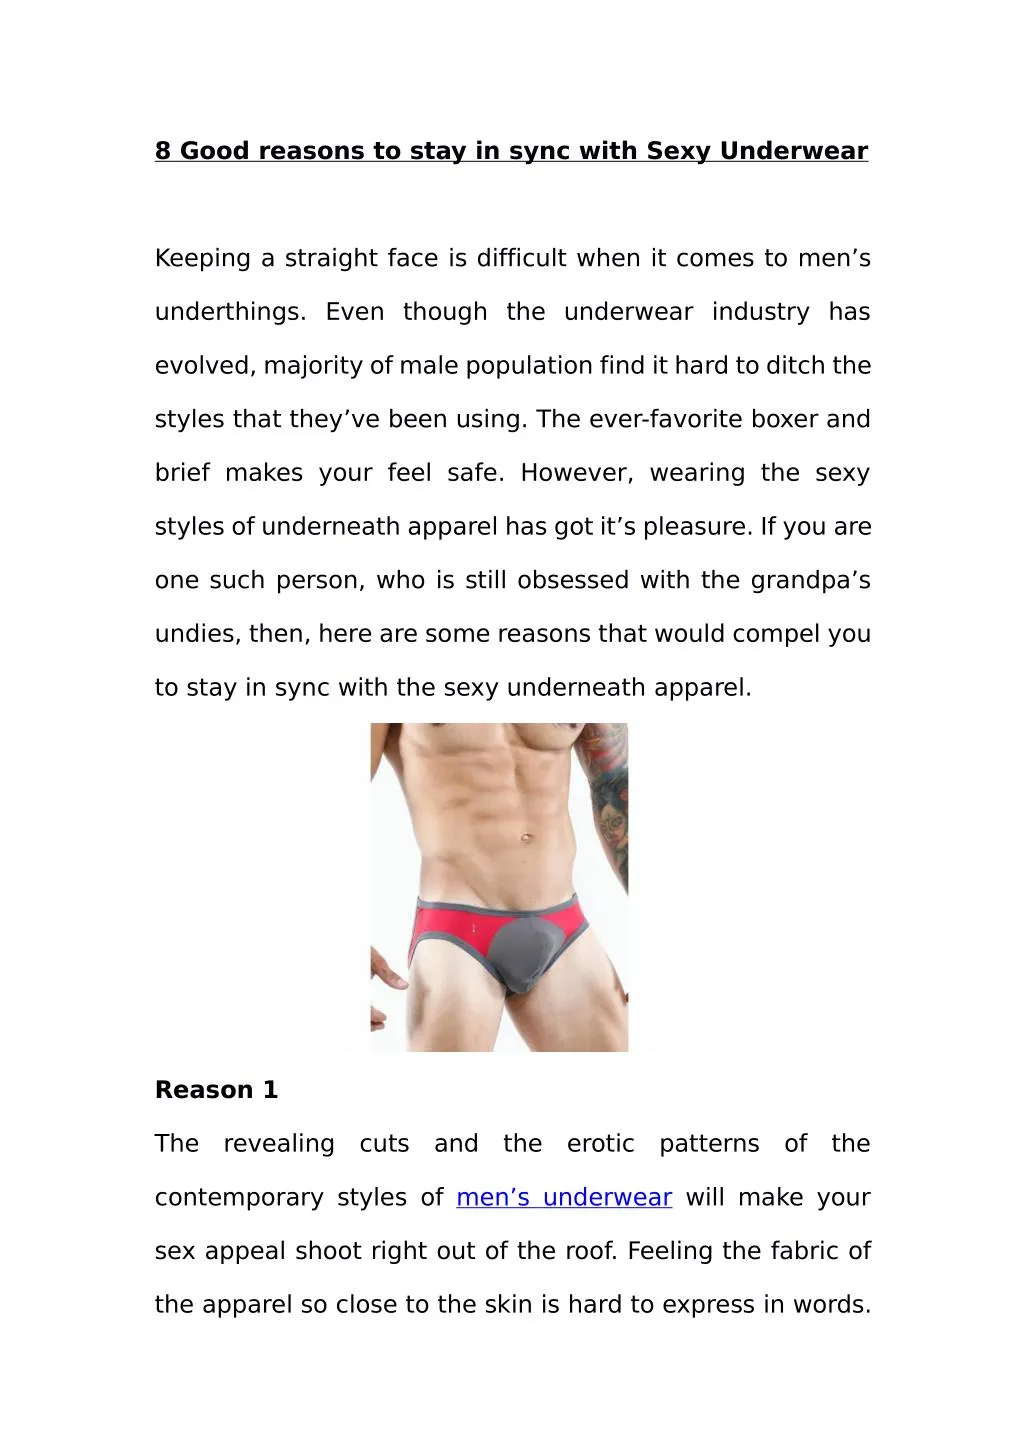 8 good reasons to stay in sync with sexy underwear